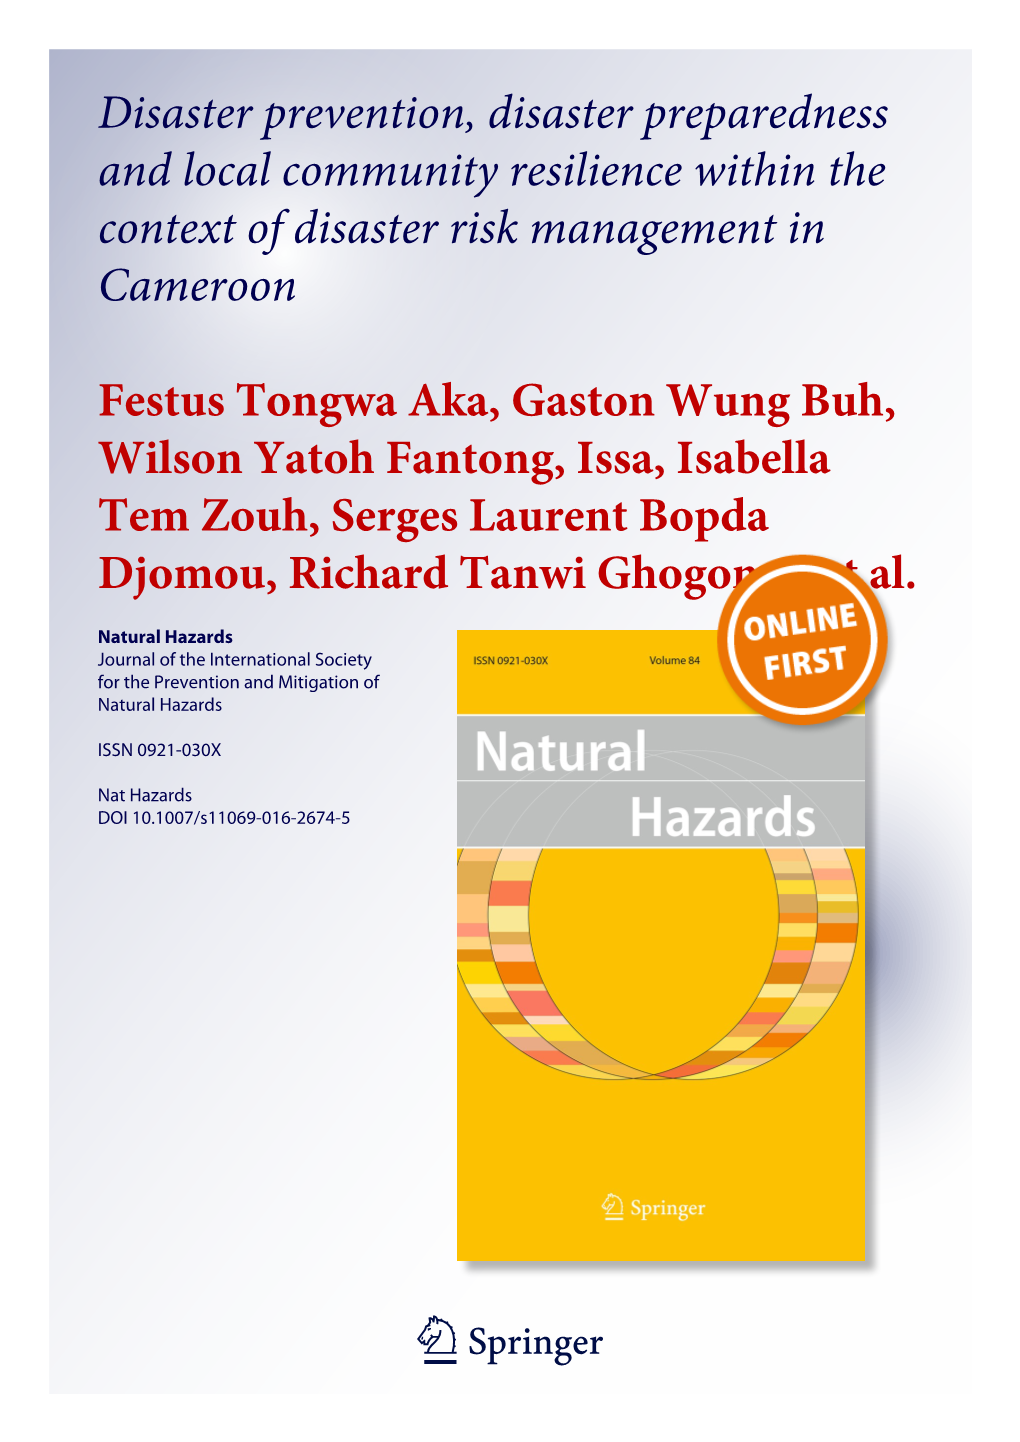 Disaster Prevention, Disaster Preparedness and Local Community Resilience Within the Context of Disaster Risk Management in Cameroon